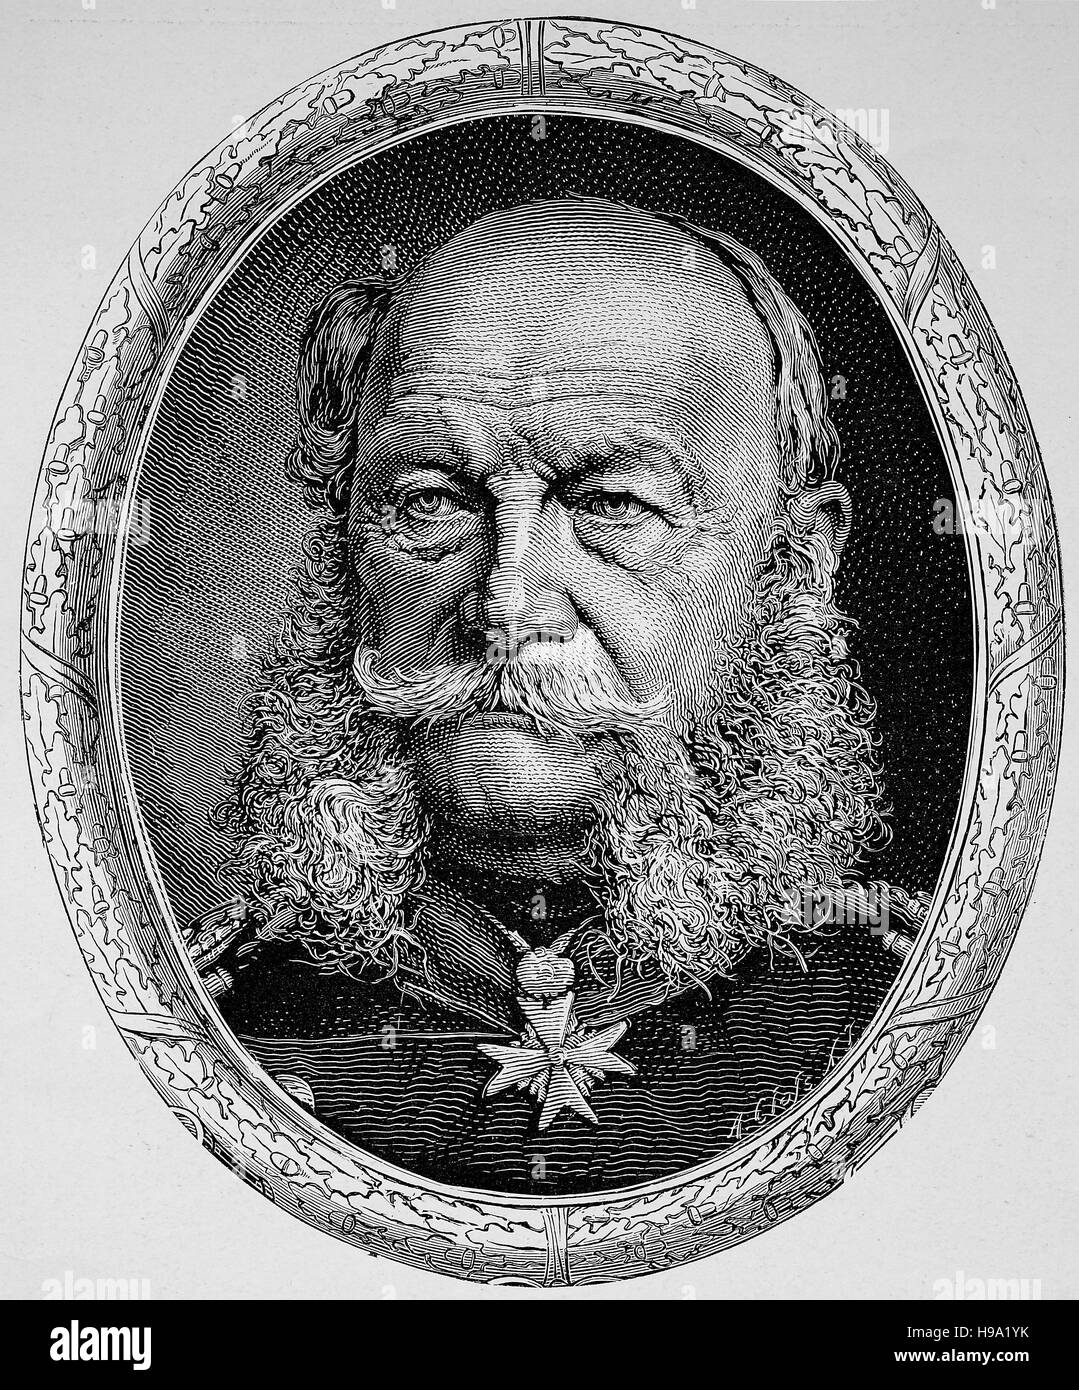 Wilhelm I., born as Wilhelm Friedrich Ludwig von Preussen in Berlin, from the house Hohenzollern war since 1858 Regent and since 1861 king of Prussia, from 1871 german emporer., historical illustration Stock Photo